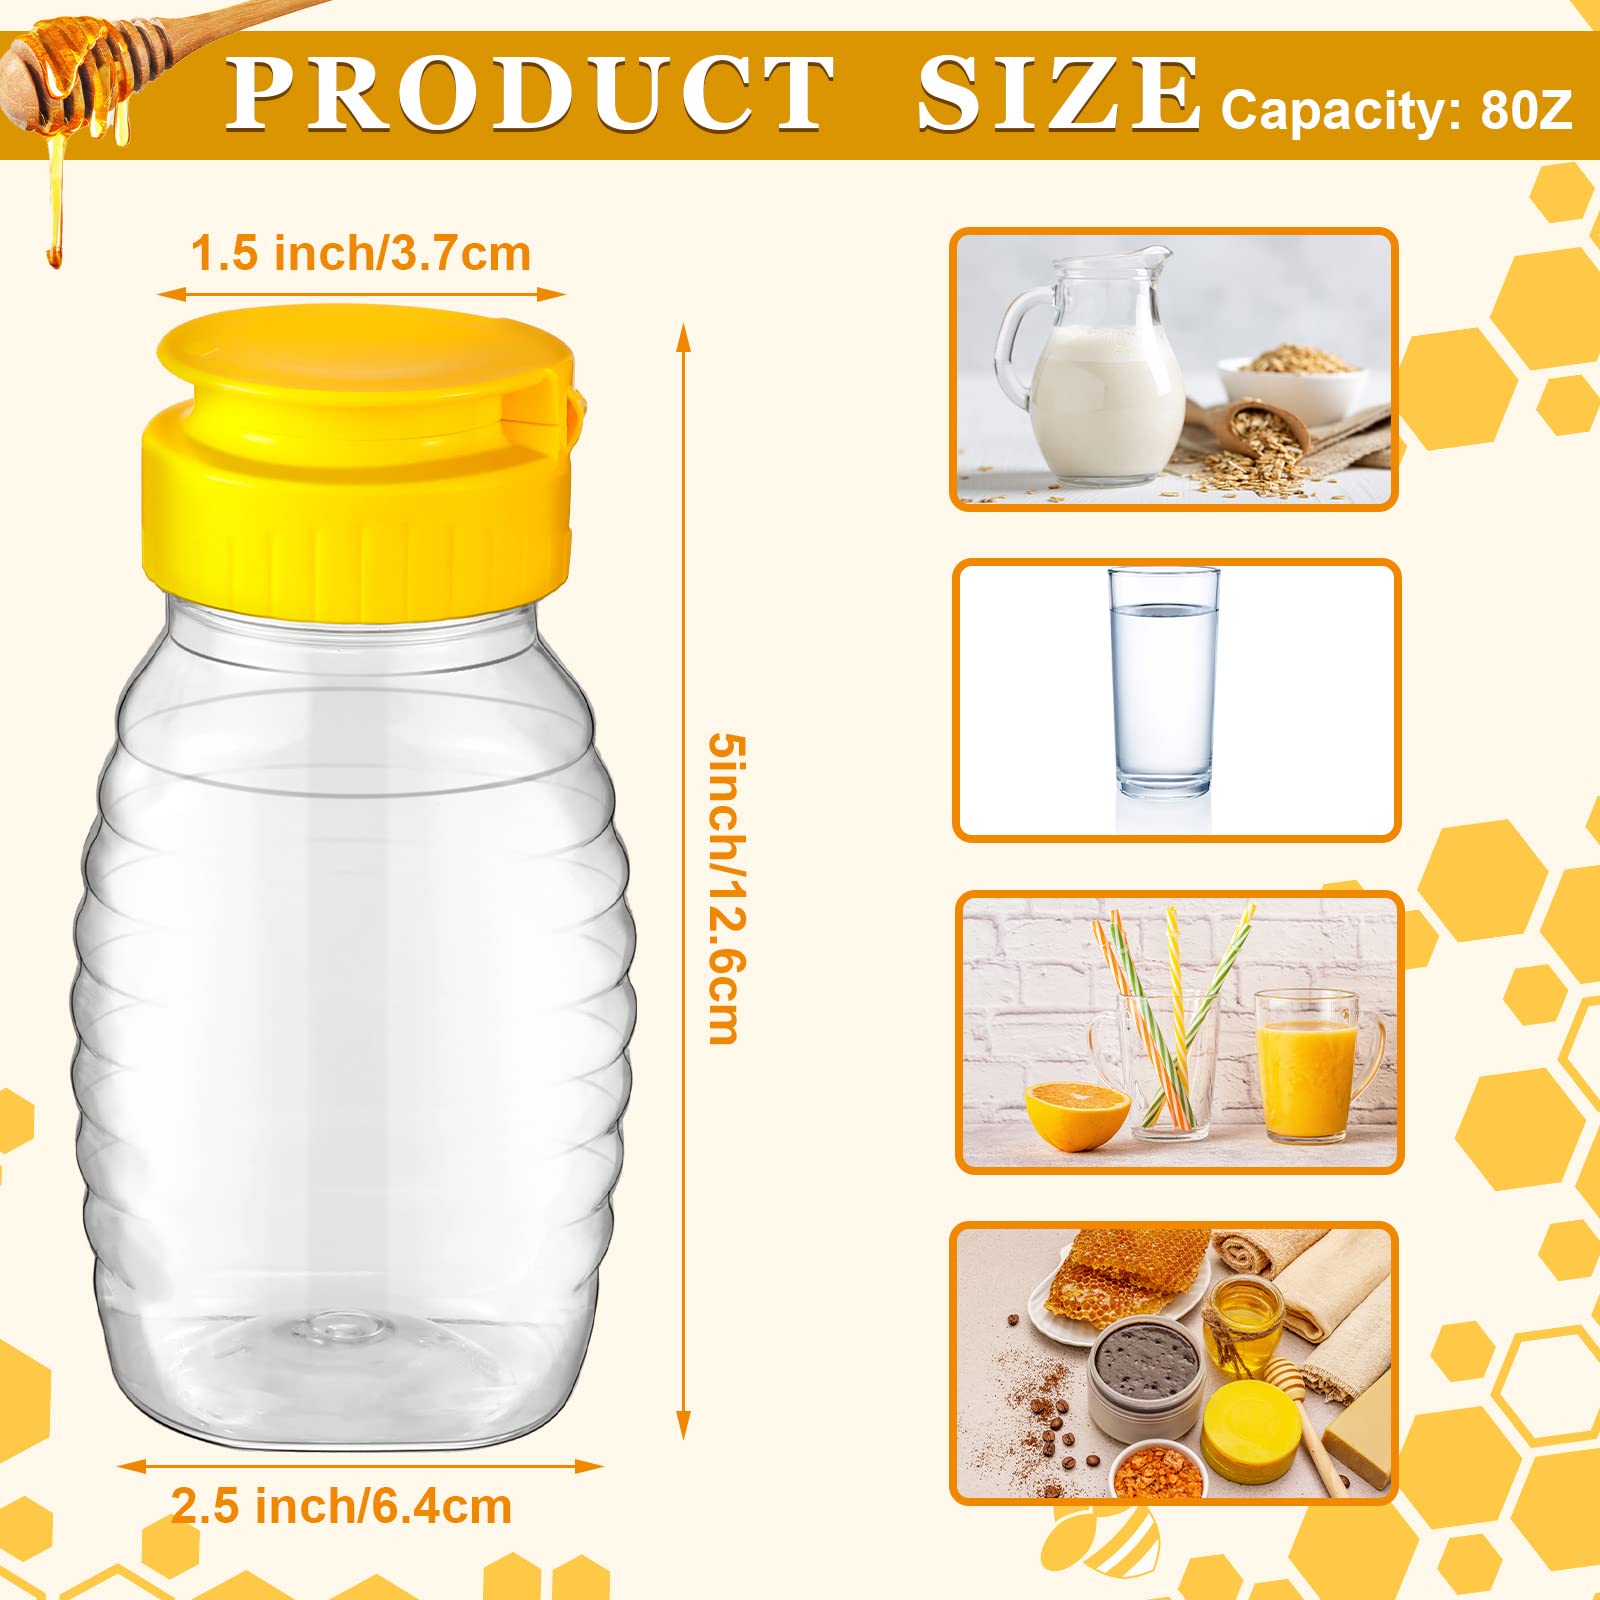 Hoolerry 48 Pack 8 oz Clear Plastic Honey Bottles Refillable Squeeze Honey Container Empty Honey Jars Honey Dispenser with Flip Top Lid Plastic Squeeze Bottles for Sauces Syrup Storing and Dispensing